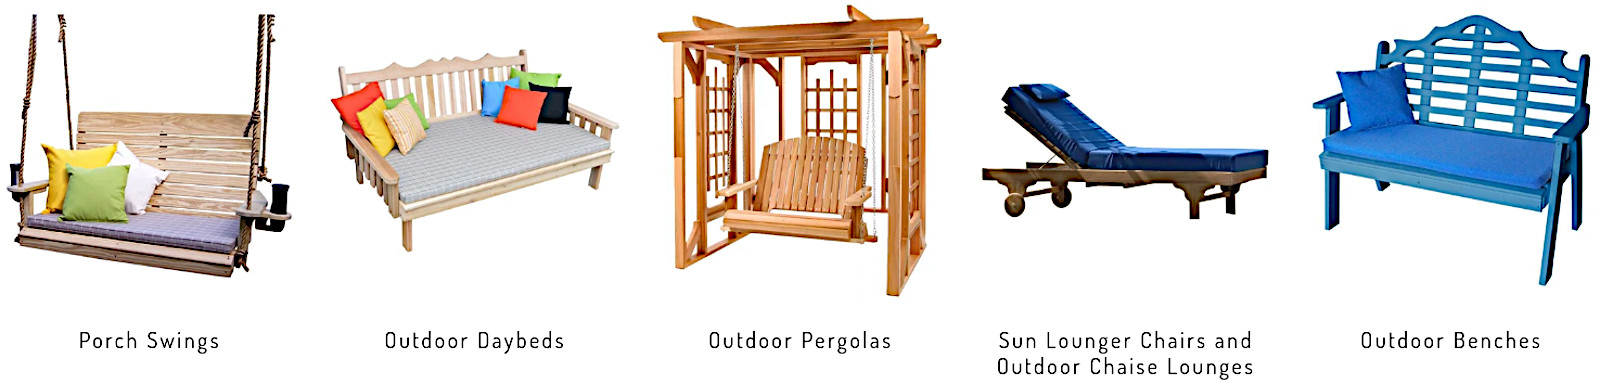 Discount Rate outdoor furniture